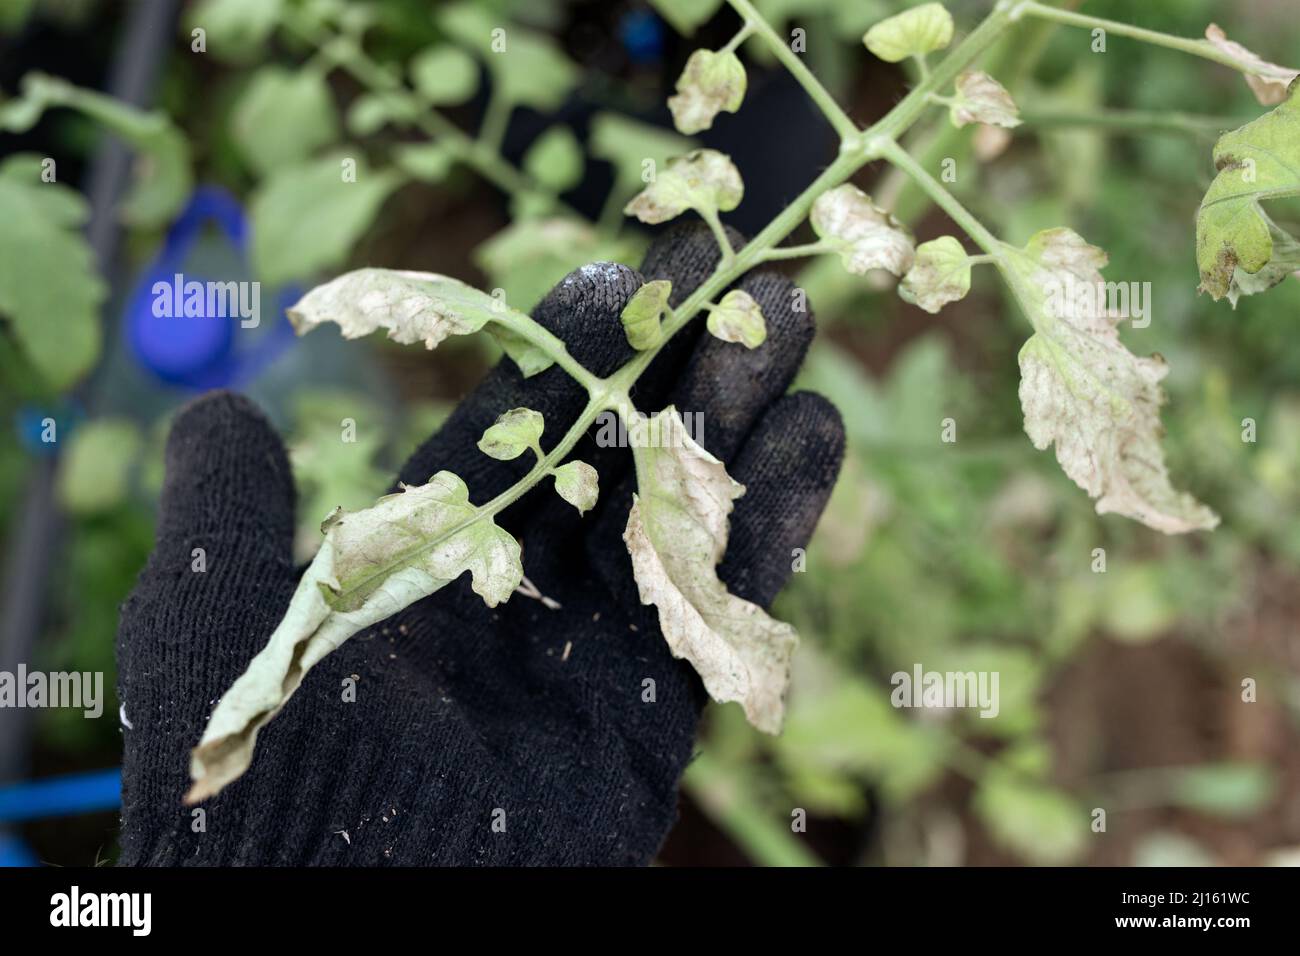 fusarium symptom in soybean, plant disease, plant pathology Wilt disease caused by fungus. disease viral diseases and biological pests and physiologic Stock Photo